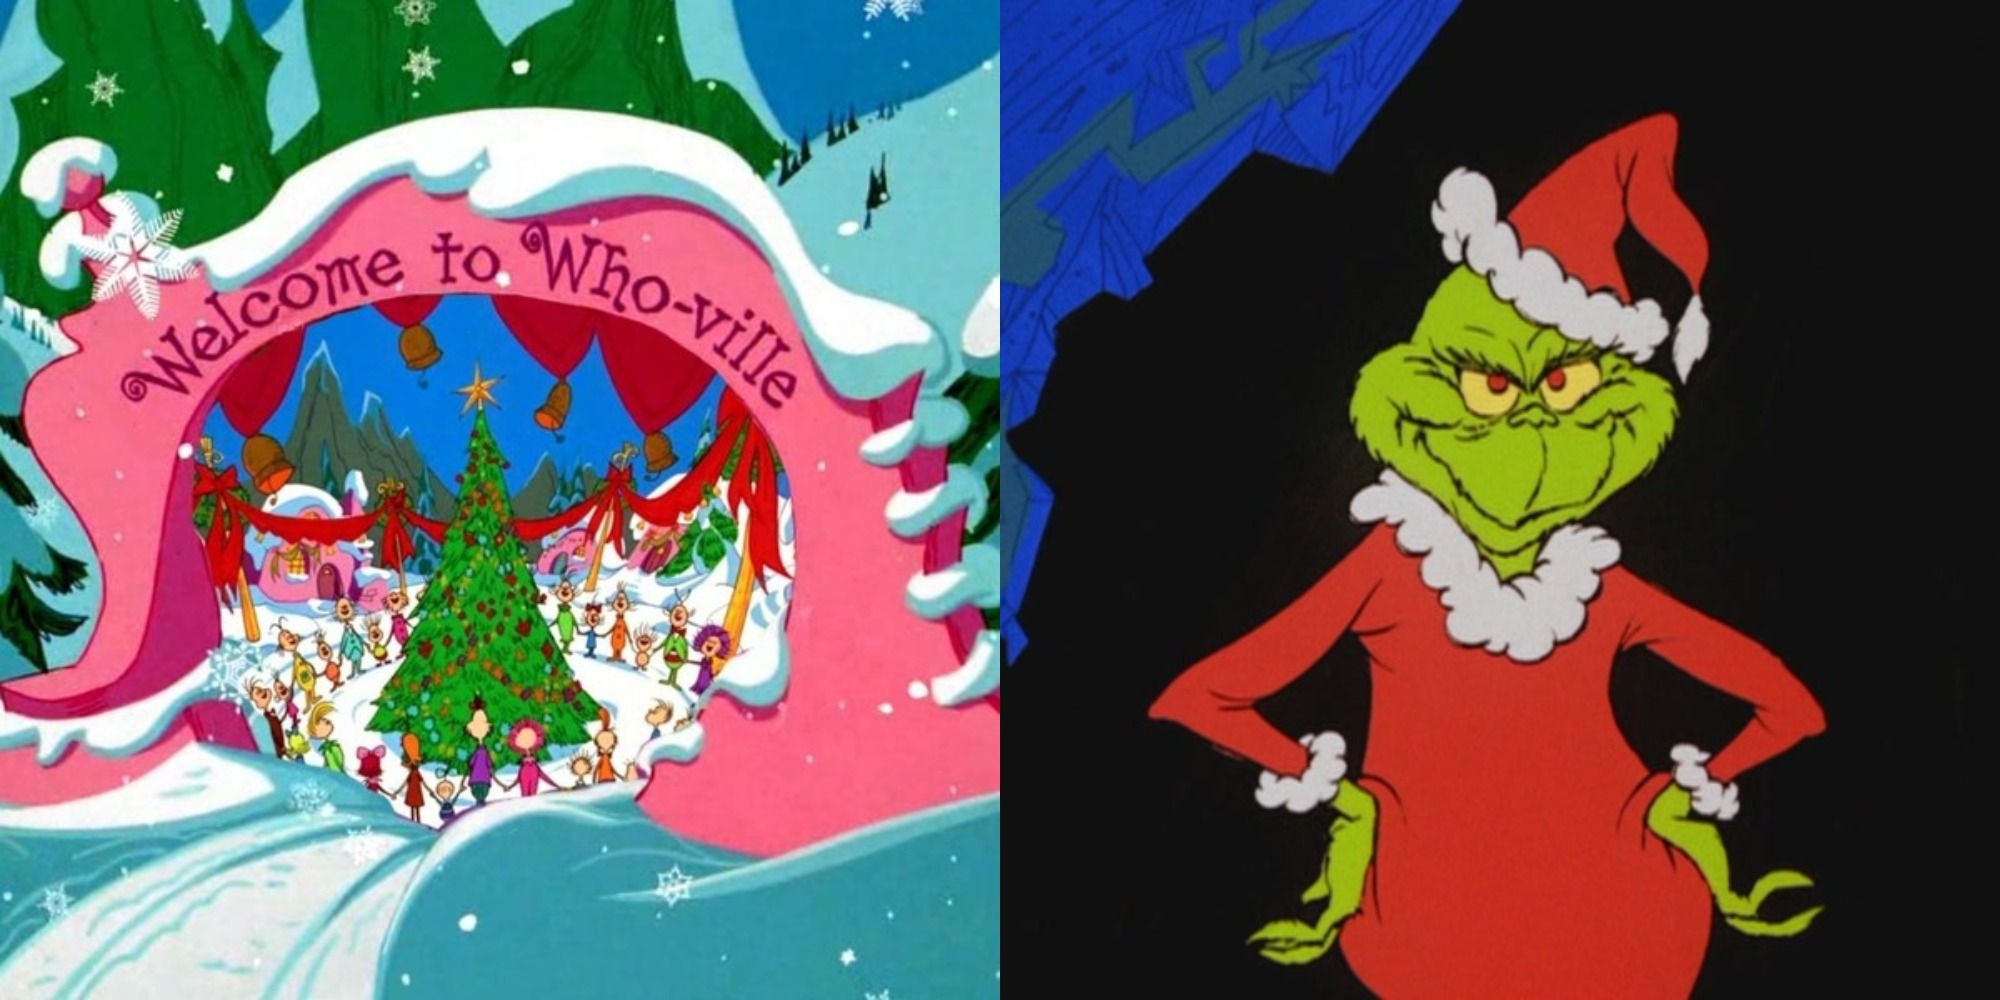 how the grinch stole christmas movie 1966